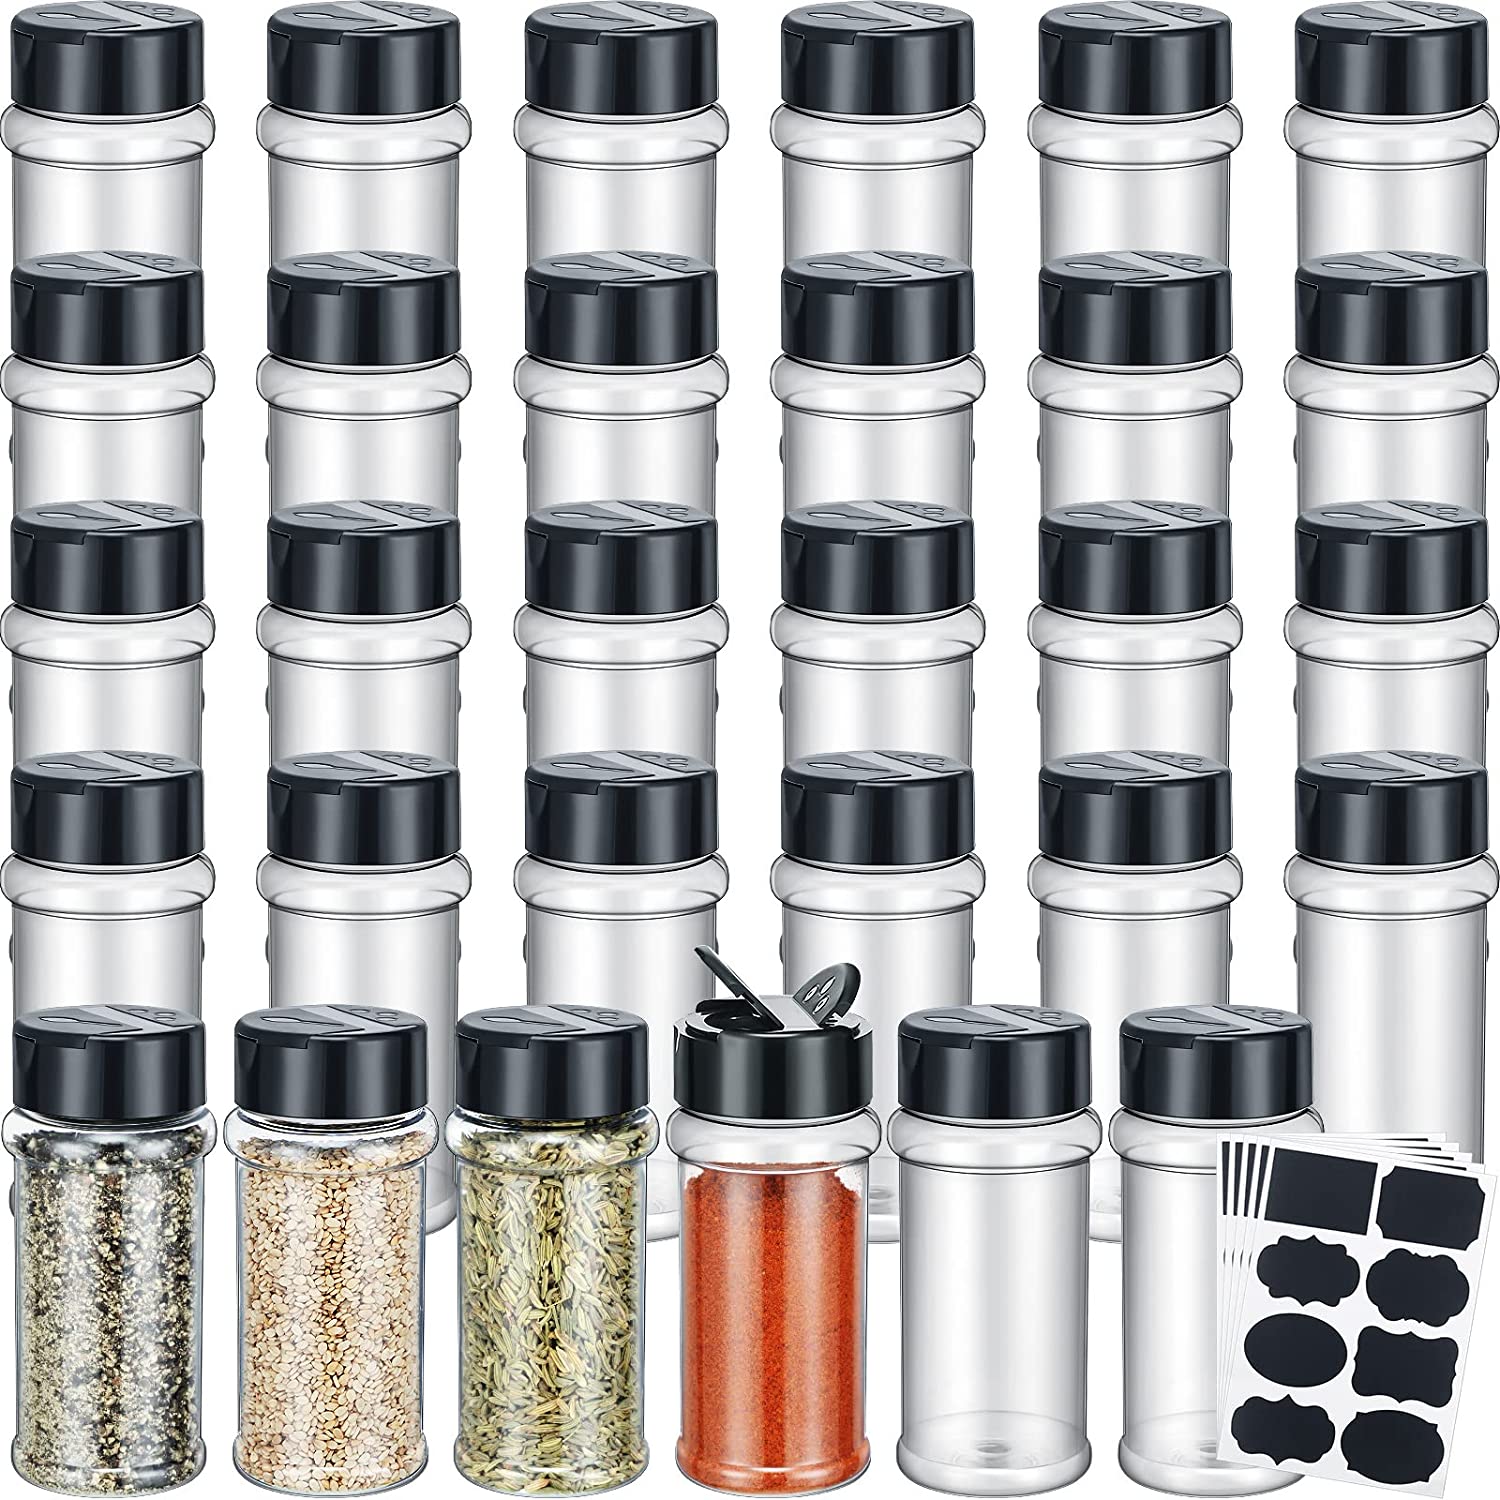 10 Pack 3.4oz/100ml Plastic Spice Bottles Set,Empty Seasoning Containers  with Black Cap,Clear Reusable Containers Jars for Spice,Herbs,Powders,Glitters  